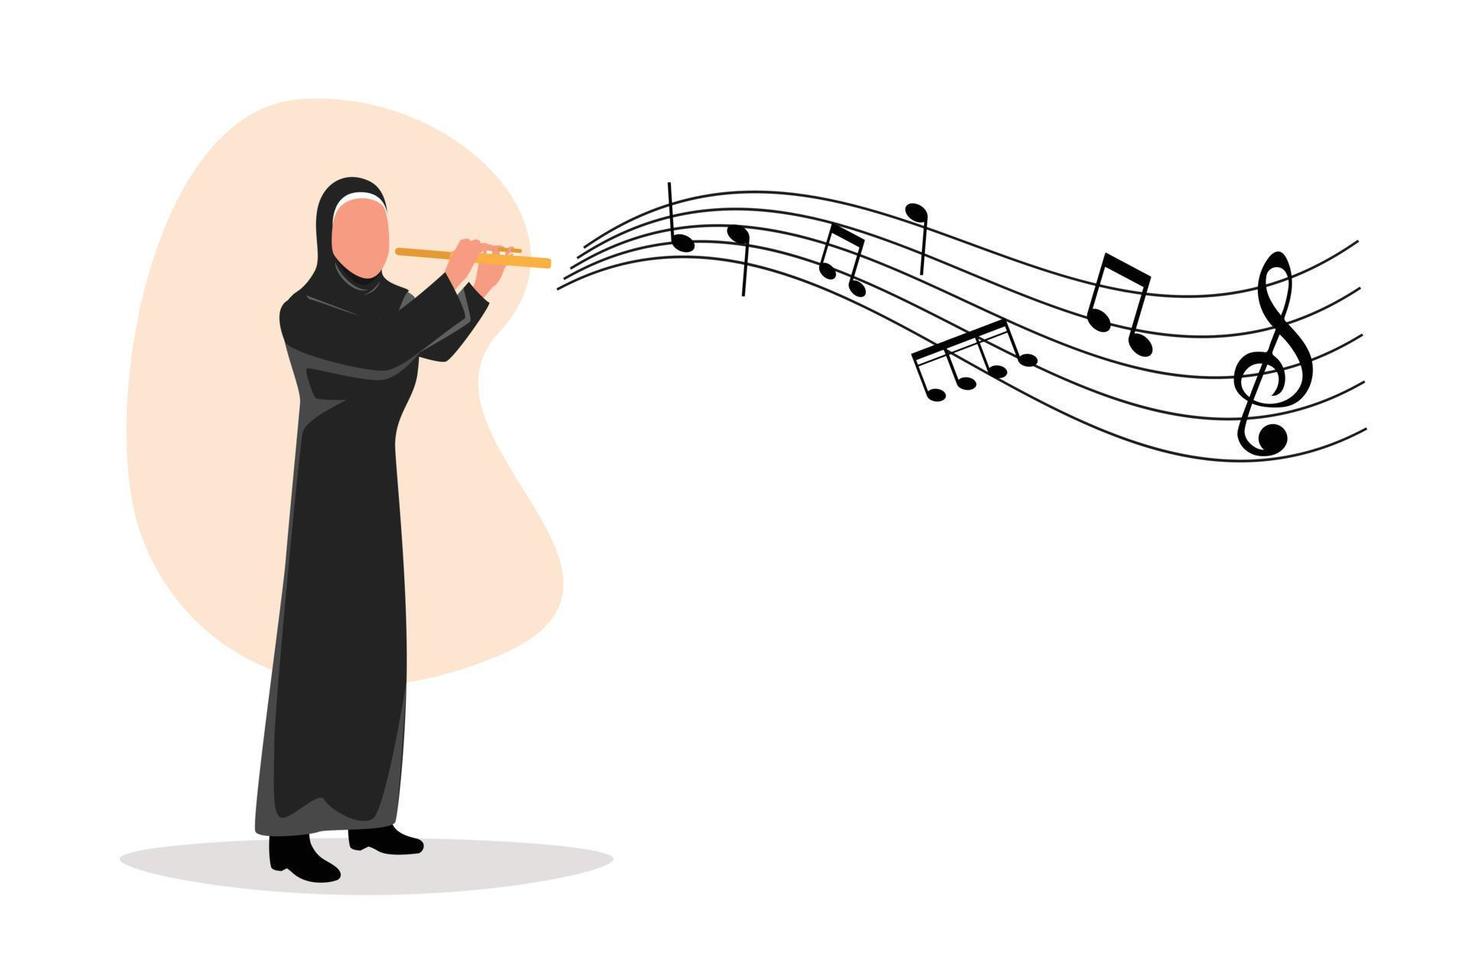 Business flat cartoon style drawing Arab female musician playing flute. Flutist performing classical music on wind instrument. Solo performance of talented flautist. Graphic design vector illustration